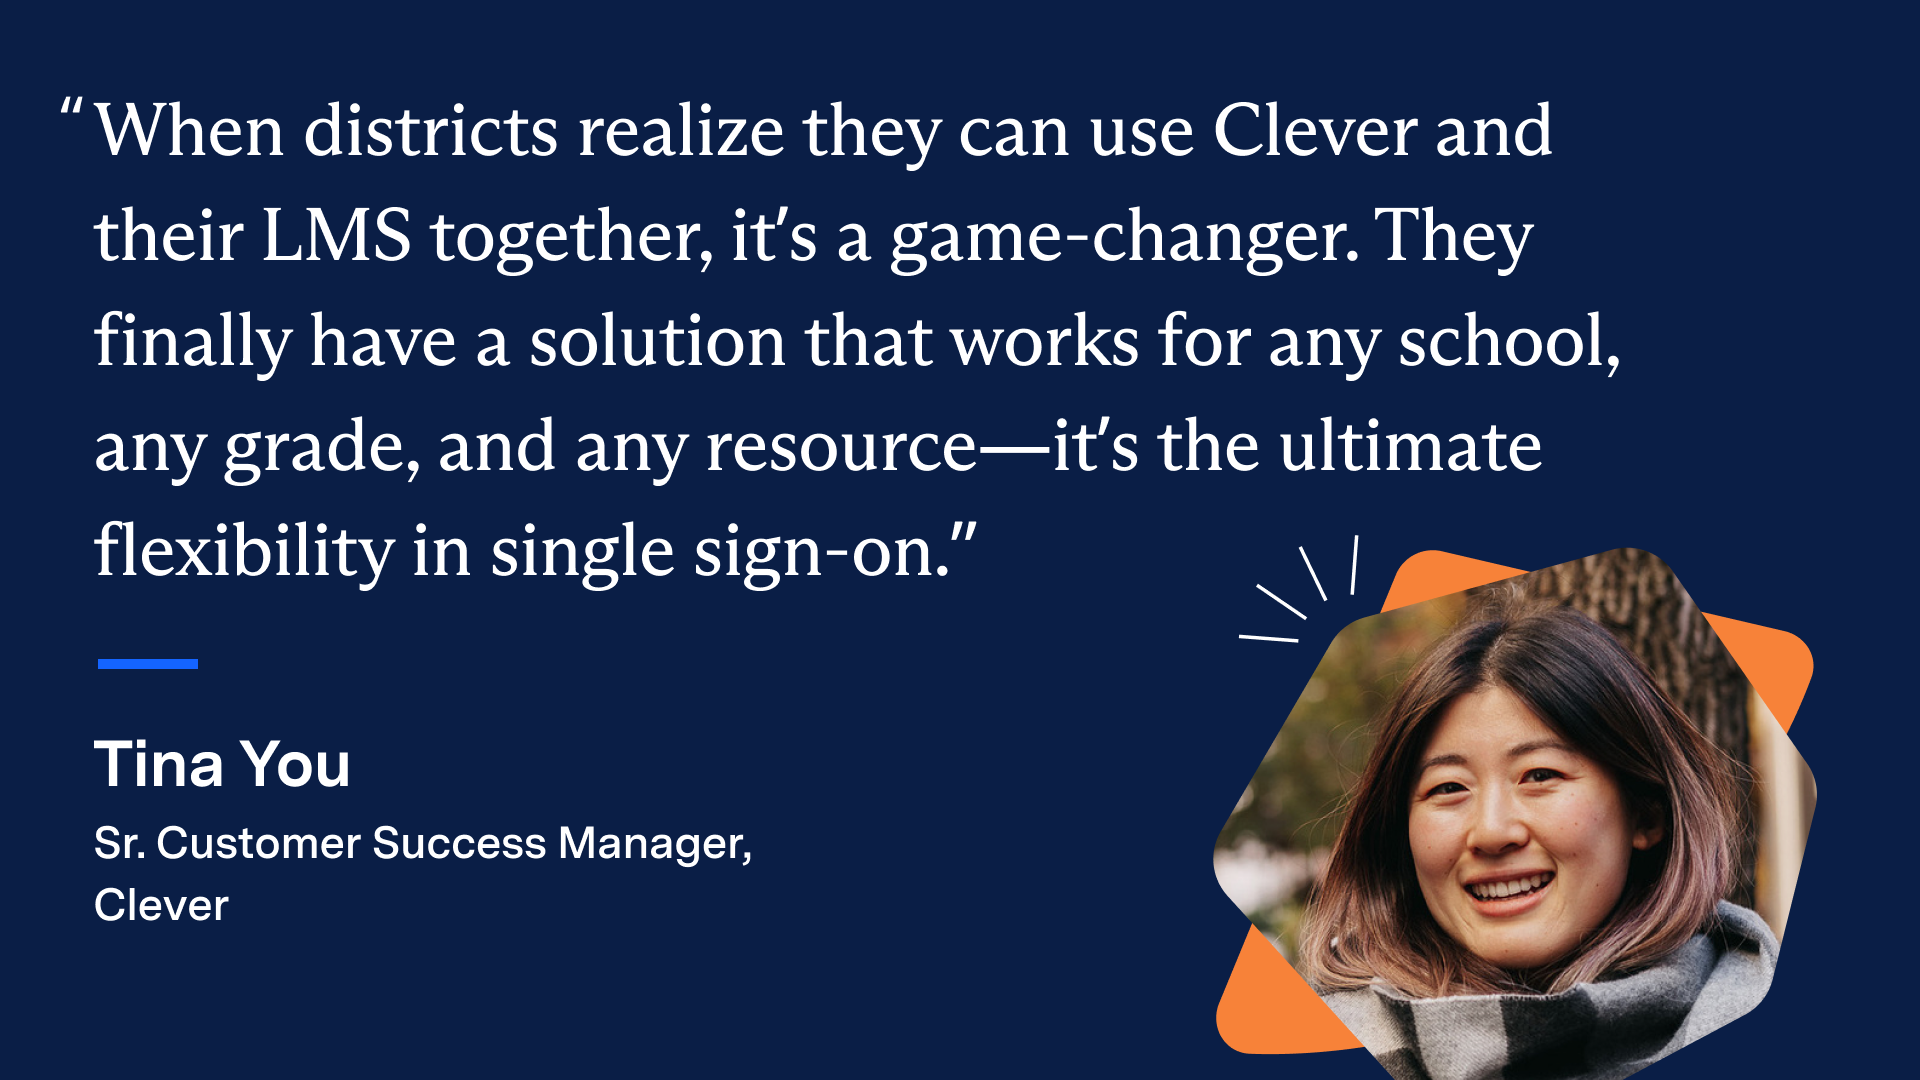 “When districts realize they can use Clever and their LMS together, it’s a game-changer. They finally have a solution that works for any school, any grade, and any resource—it’s the ultimate flexibility in single sign-on. - Tina You, Sr. Customer Success Manager, Clever